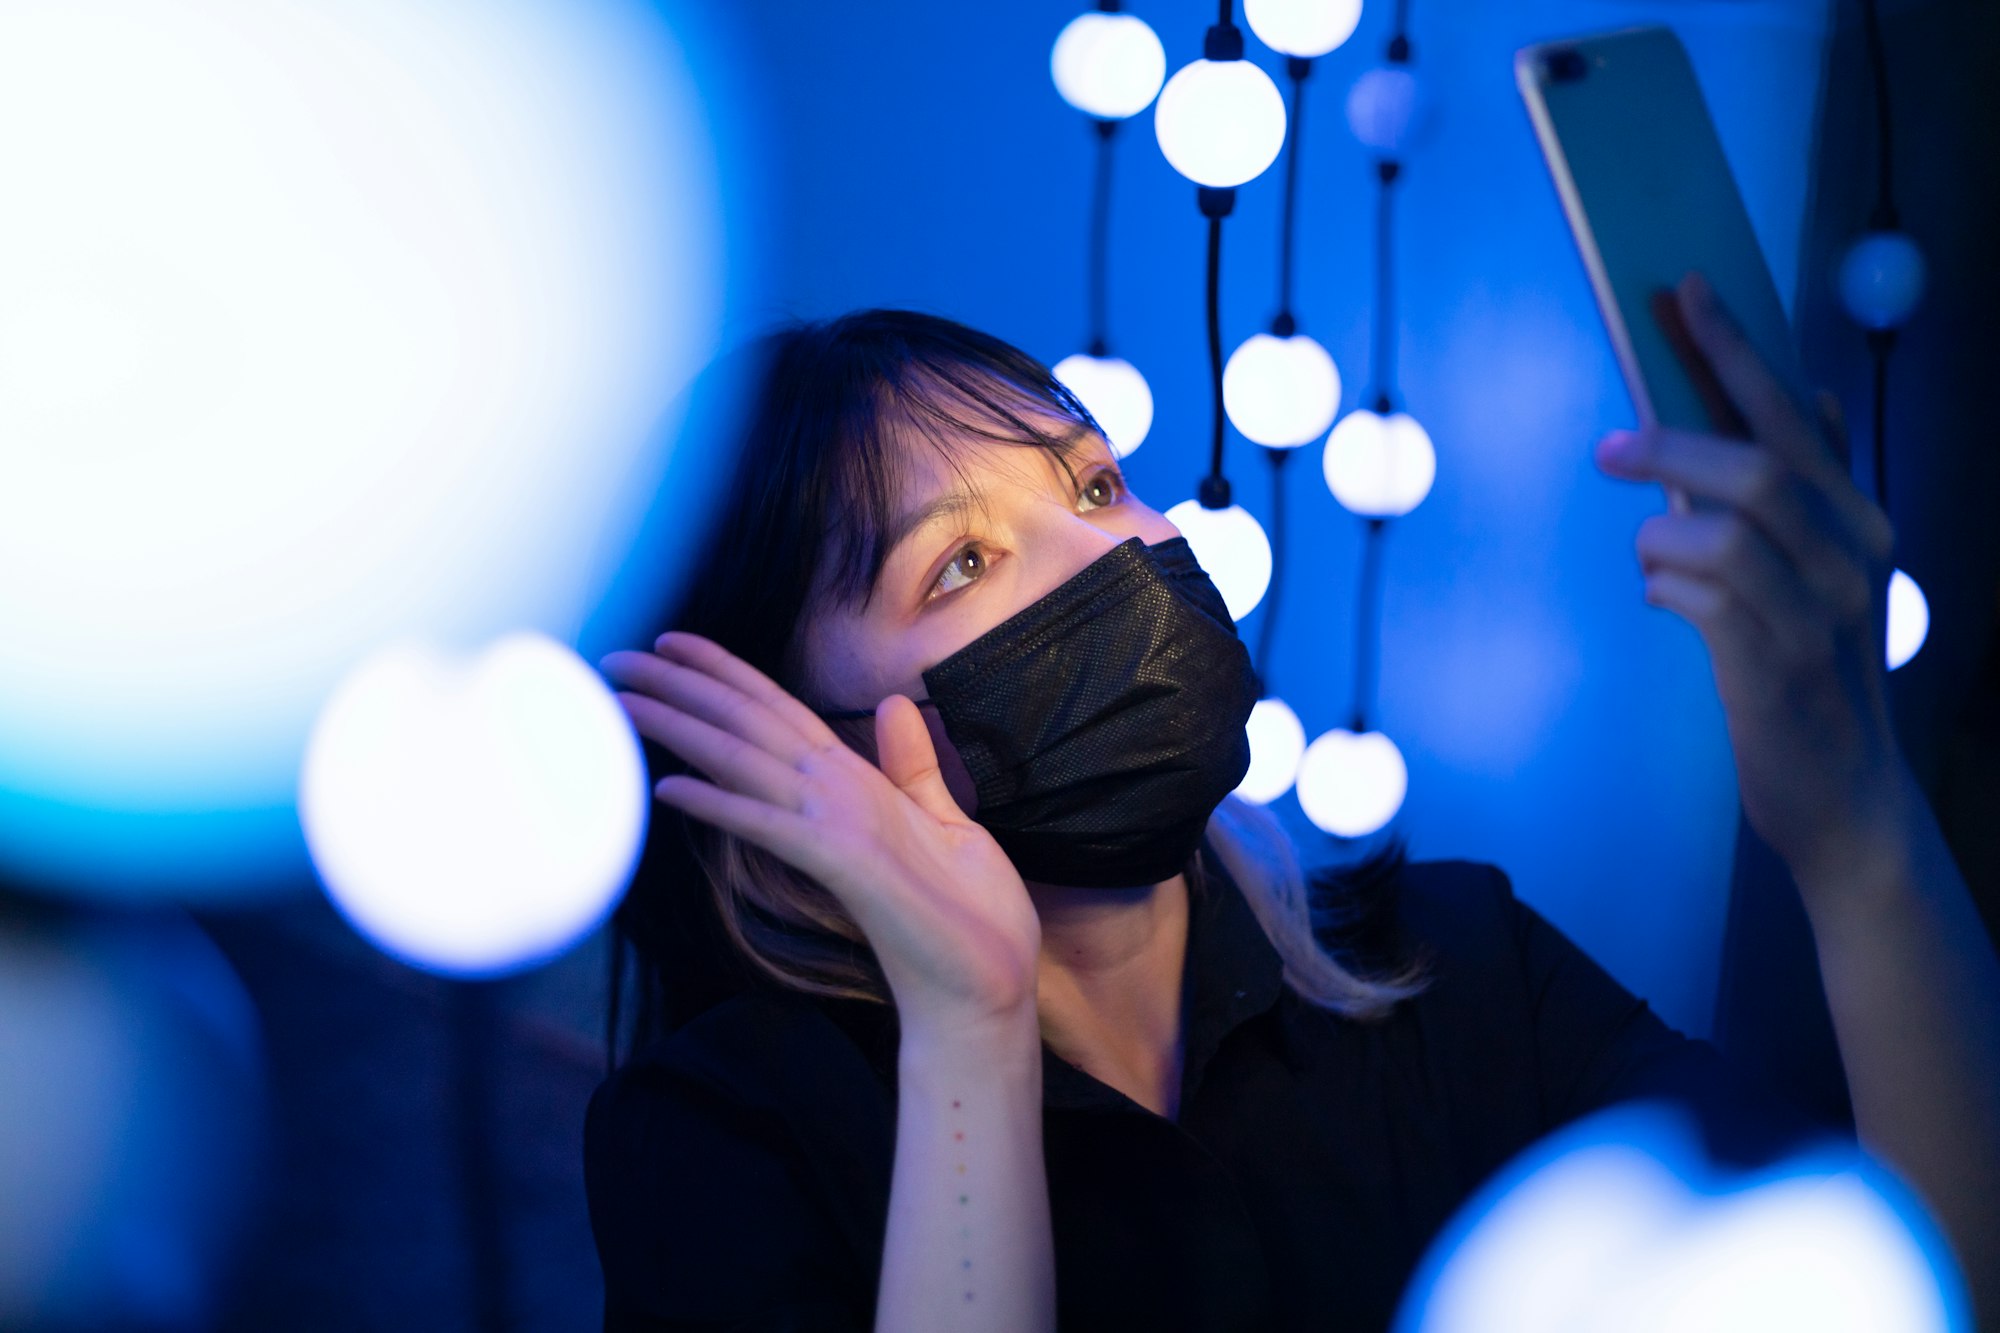 A woman wearing a mask uses her smart phone to video call at night surrounded by glowing blue lights.